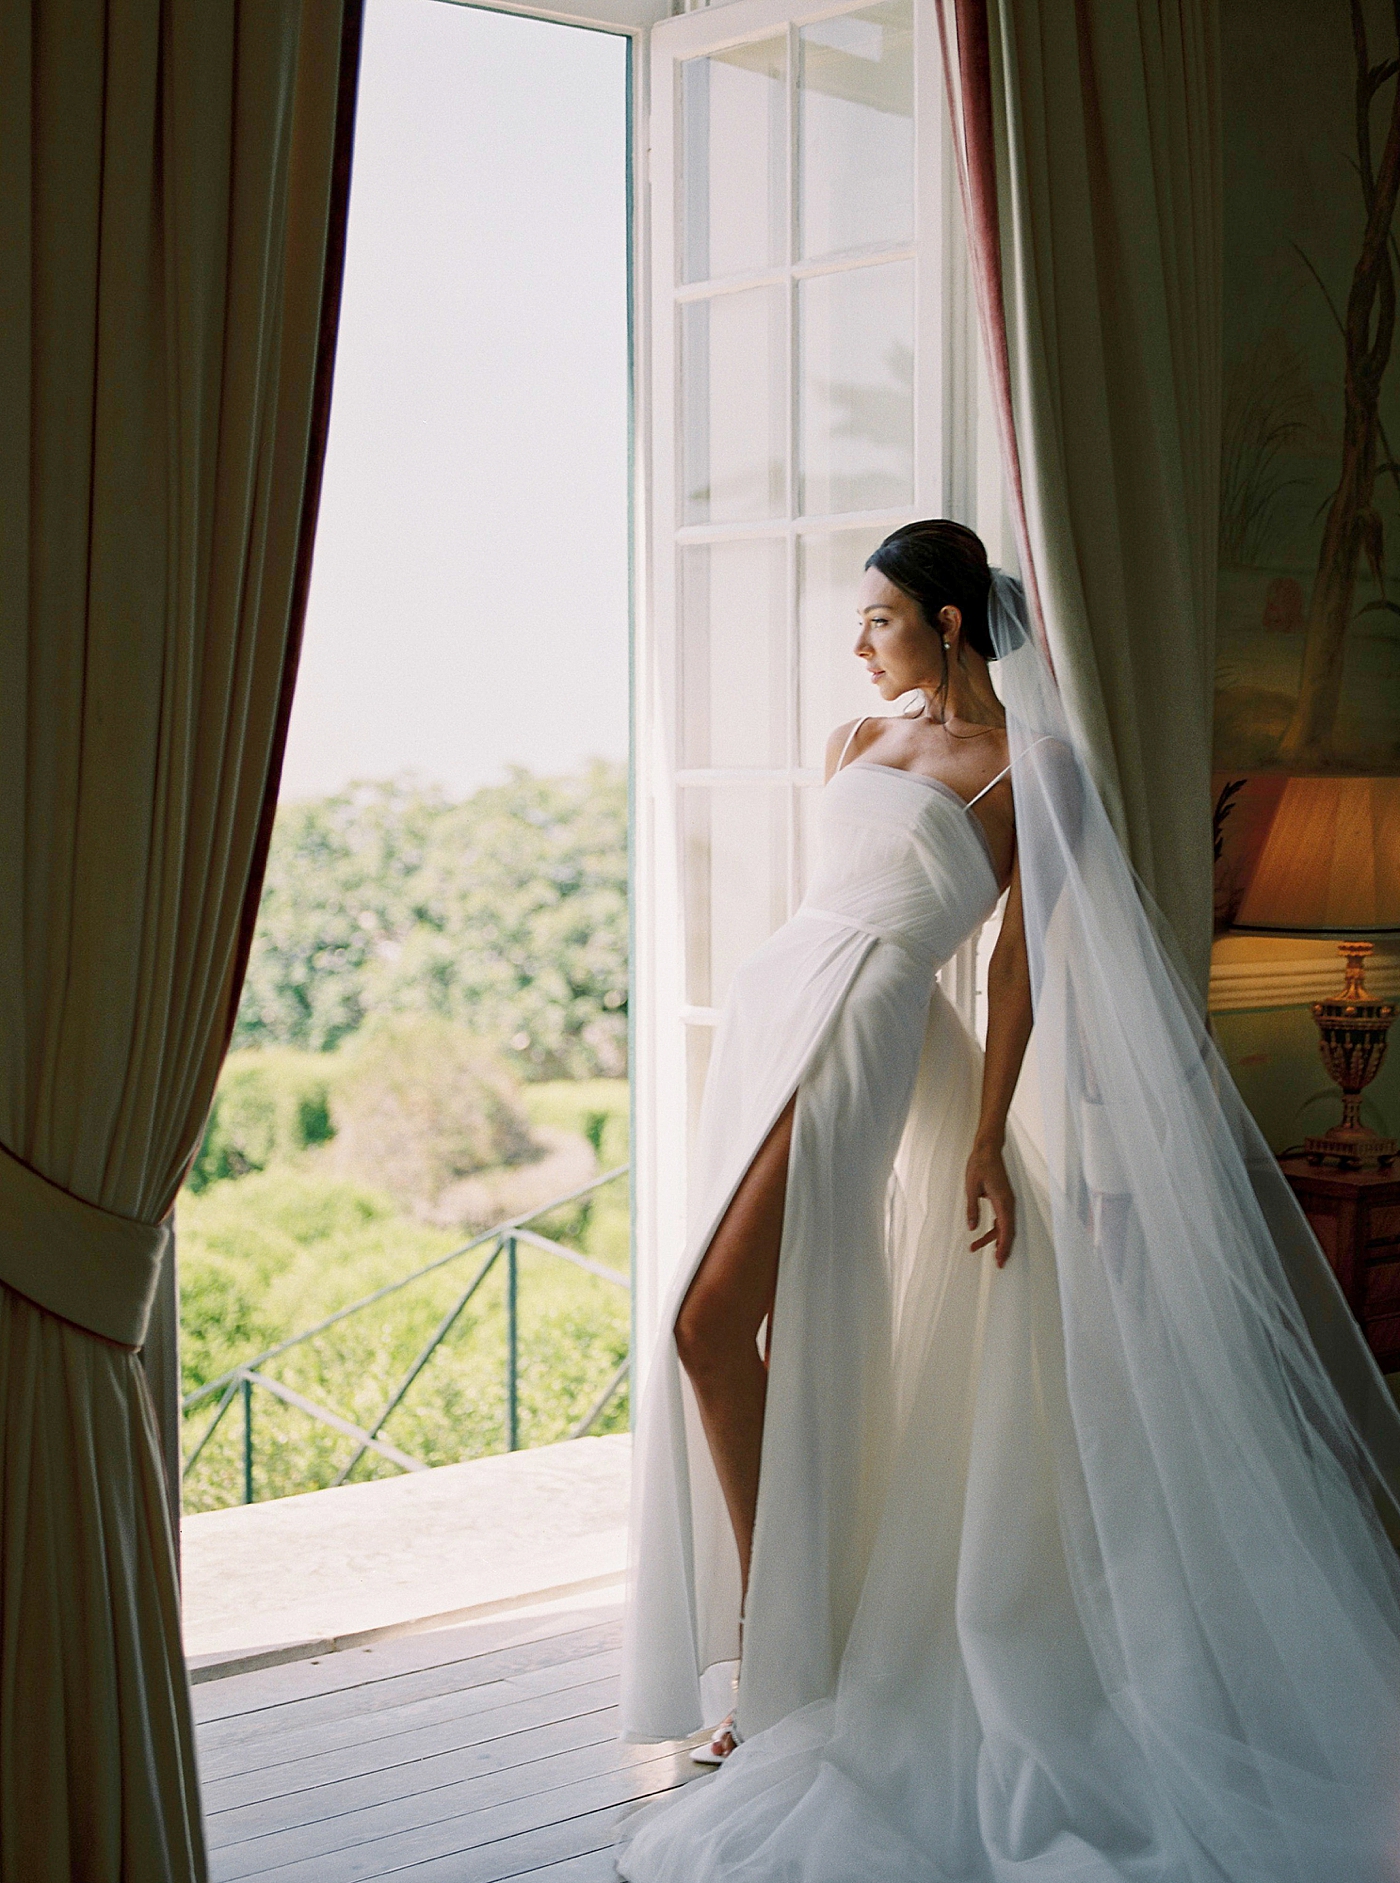 Bride standing near a door | Image by Diane Sotero Photography